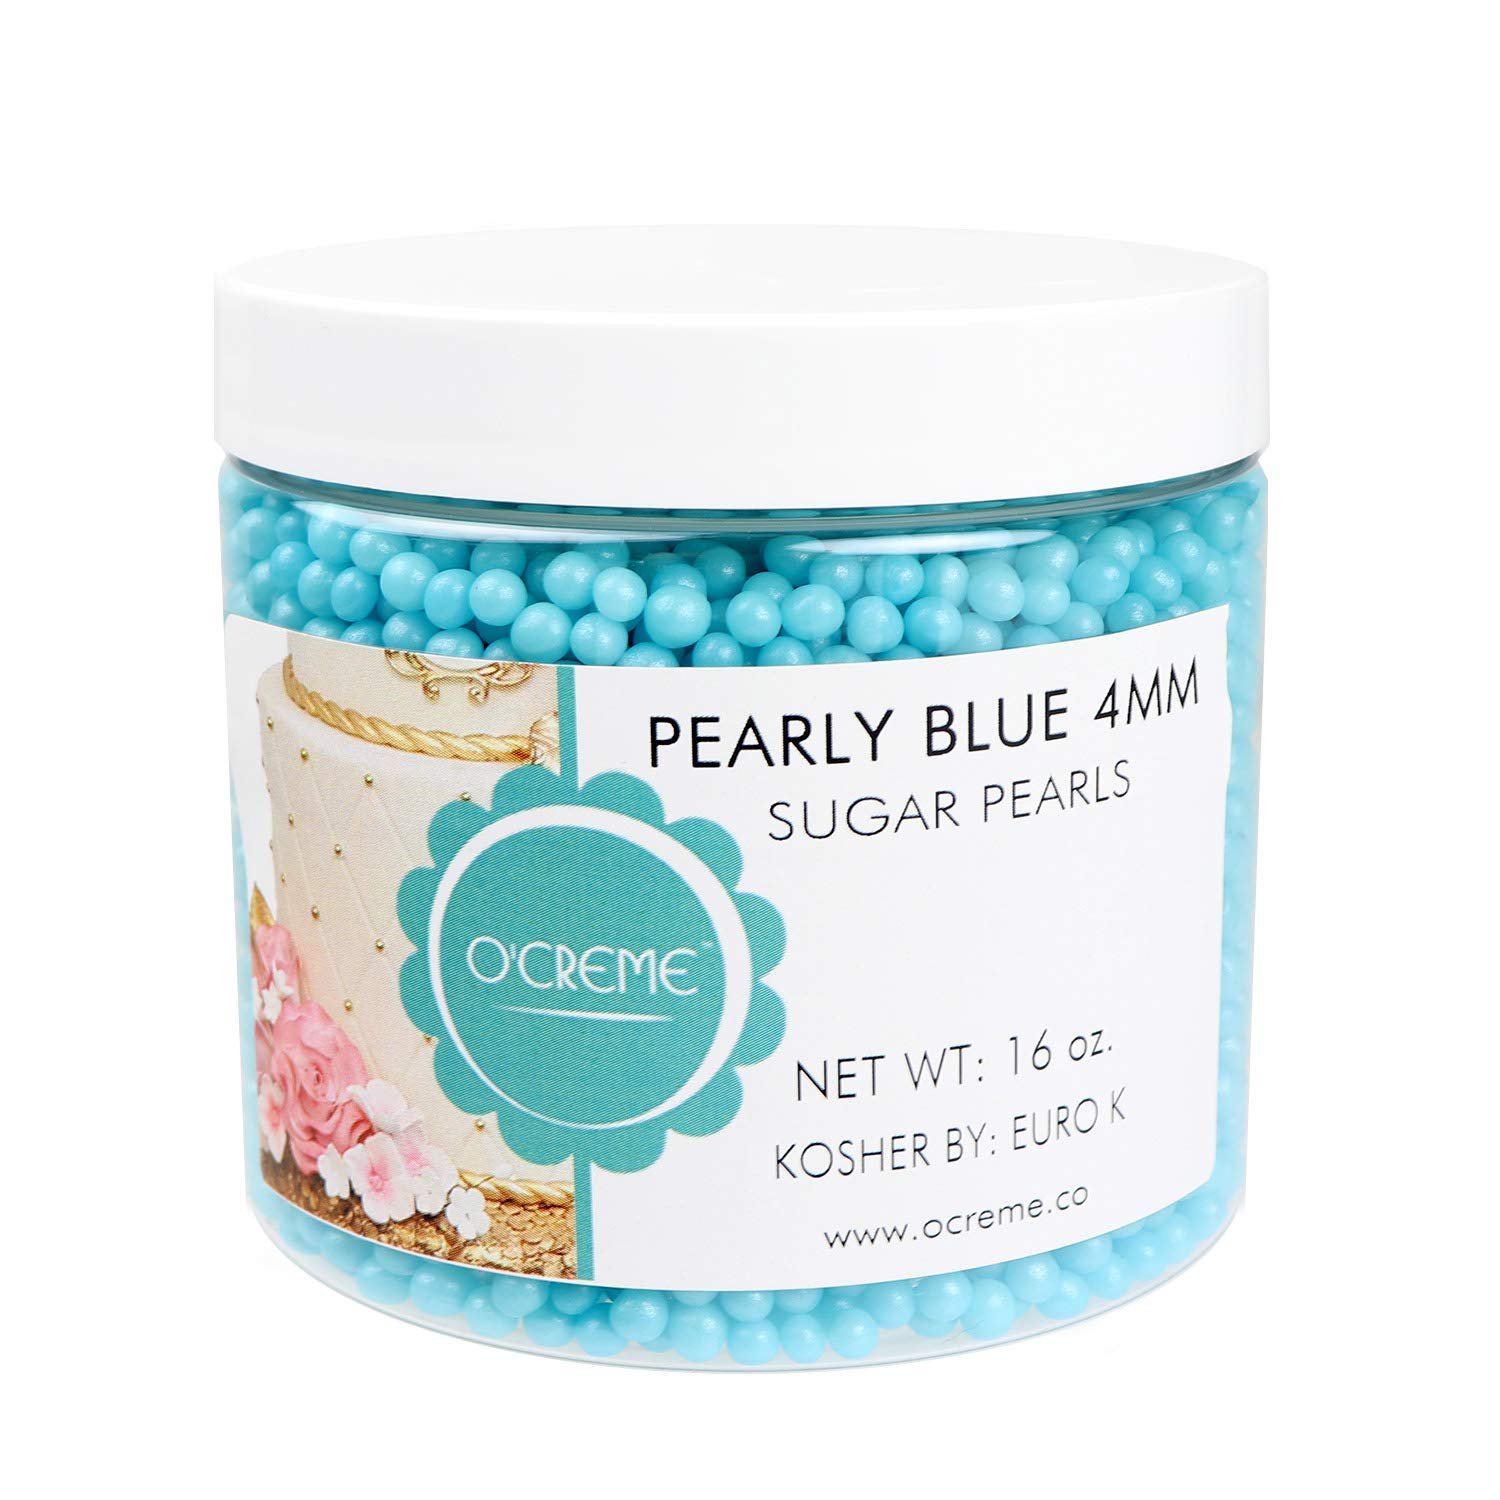 O'Creme White Edible Sugar Pearls Cake Decorating Supplies for Bakers:  Cookie, Cupcake & Icing Toppings, Beads Sprinkles For Baking, Kosher  Certified, Candy Sugar Ball Accents 8mm, 32 Oz 